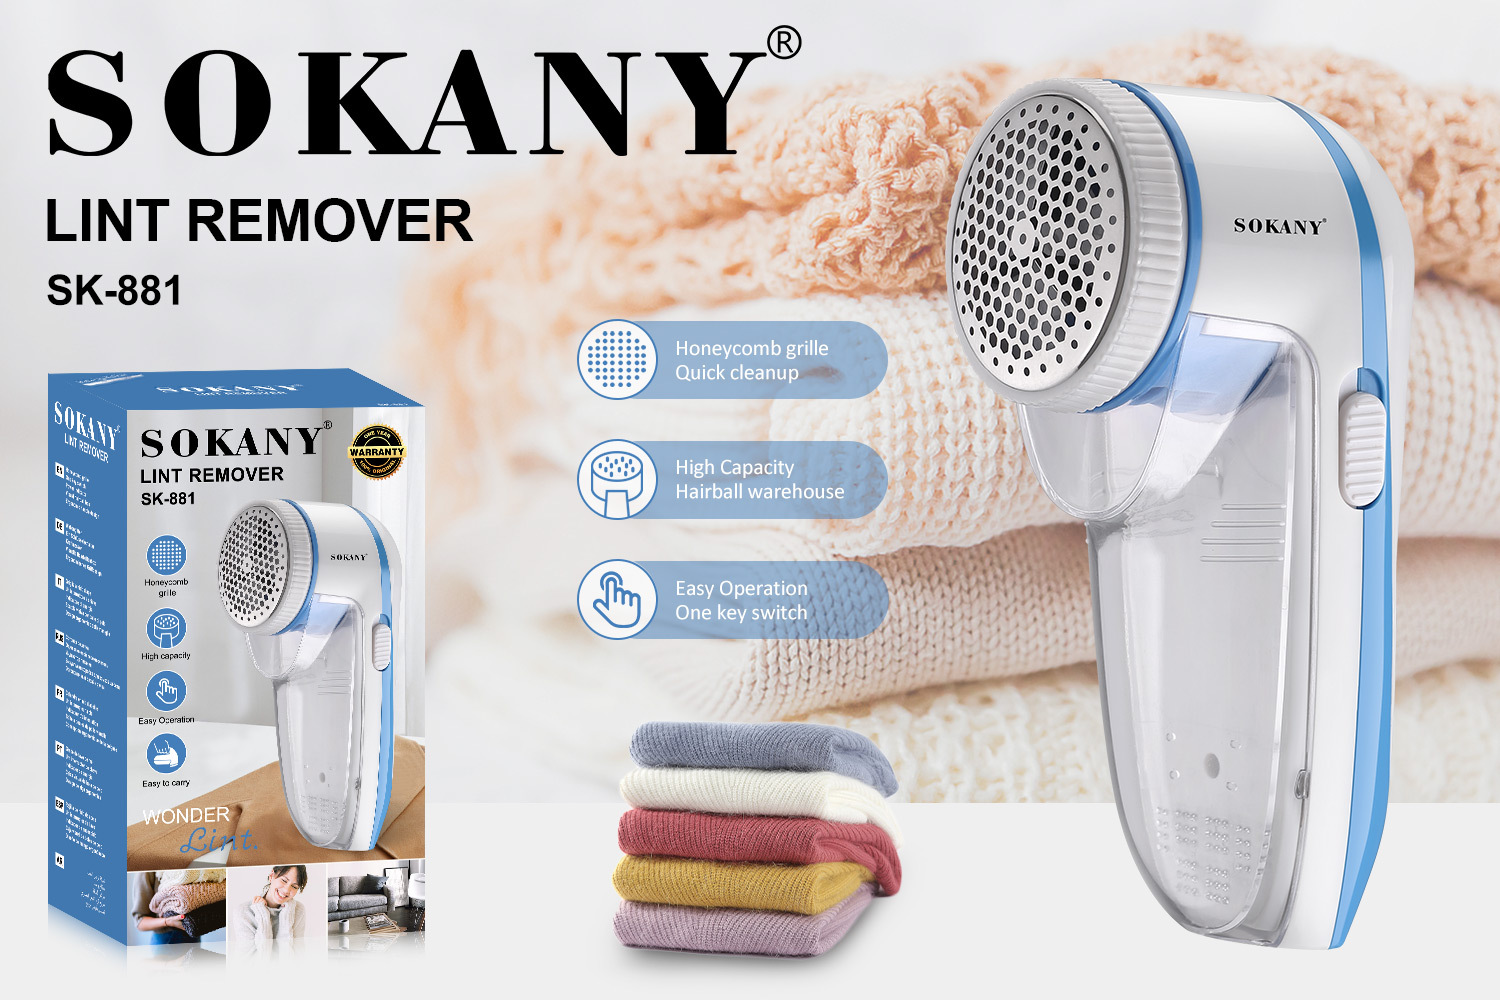 SOKANY 881 Hairball Trimmer Clothes Defur Remover USB Rechargeable Shaving Device